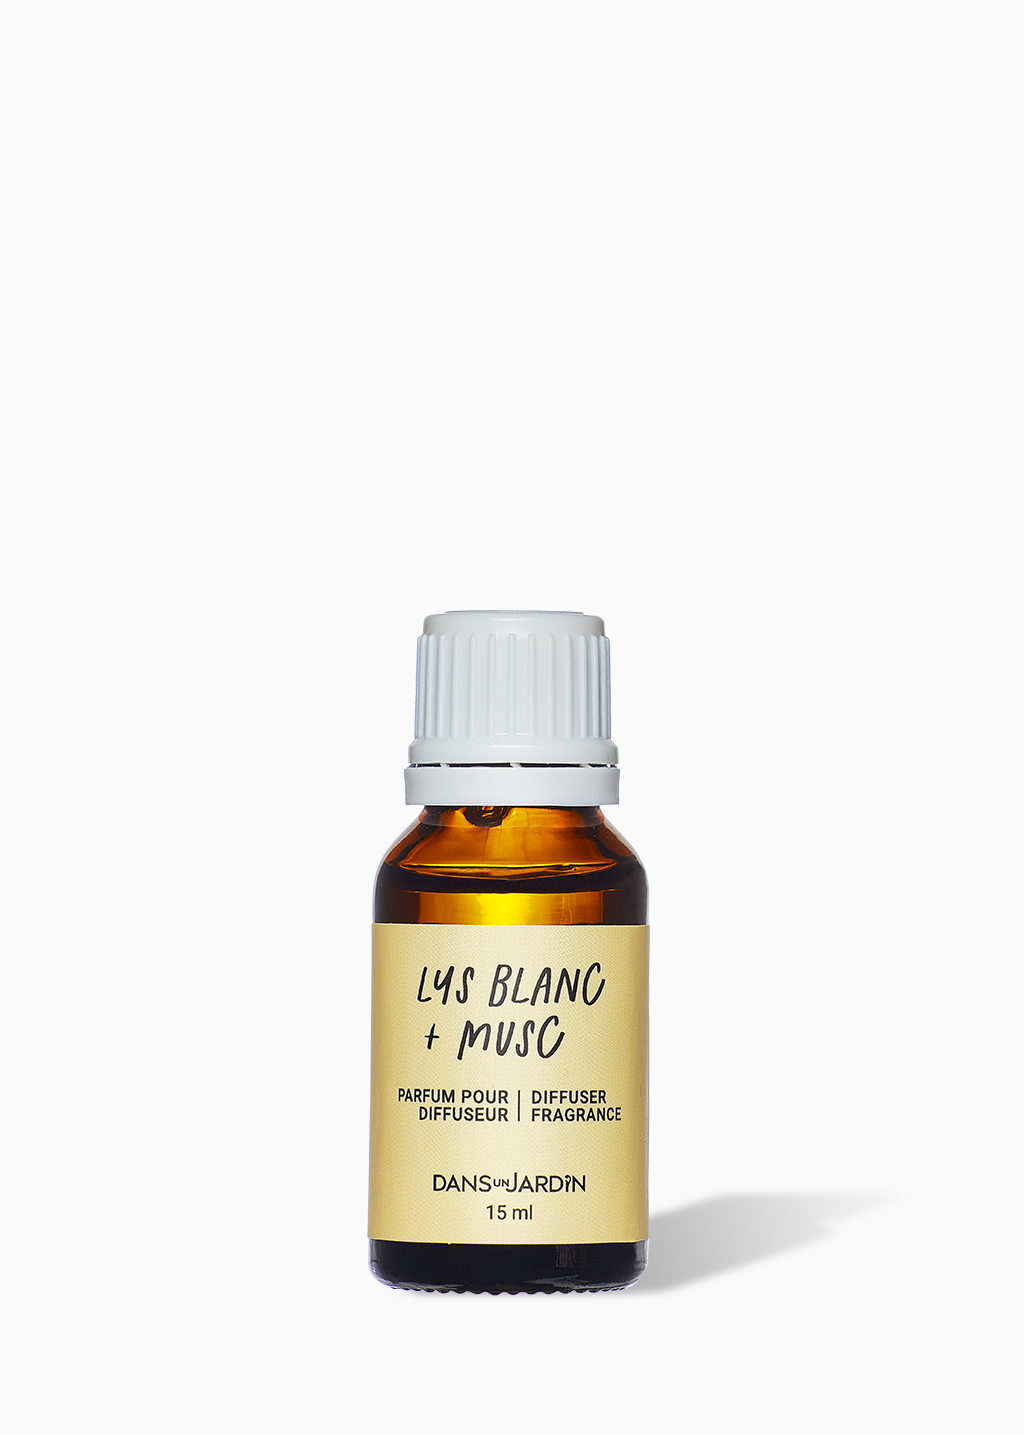 Perfume for Diffuser -  LYS BLANC+MUSC